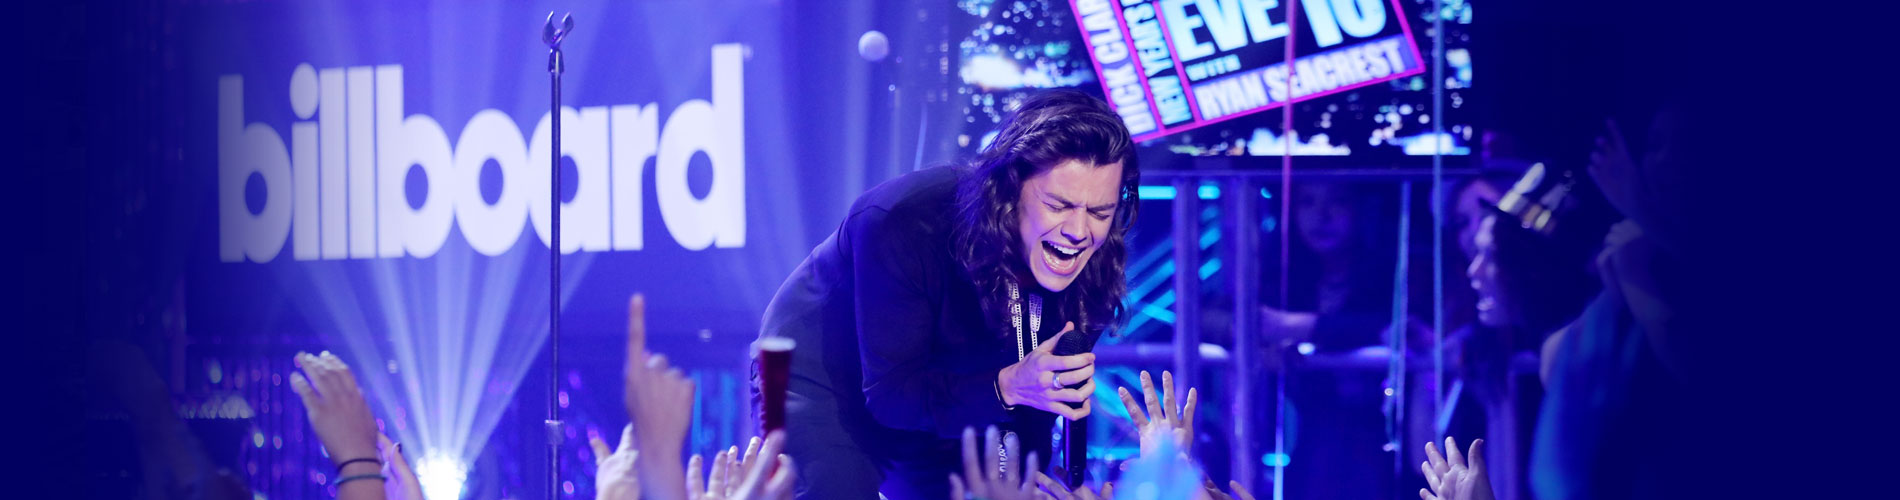 Harry Styles performs at Dick Clark's Rockin' New Years Eve